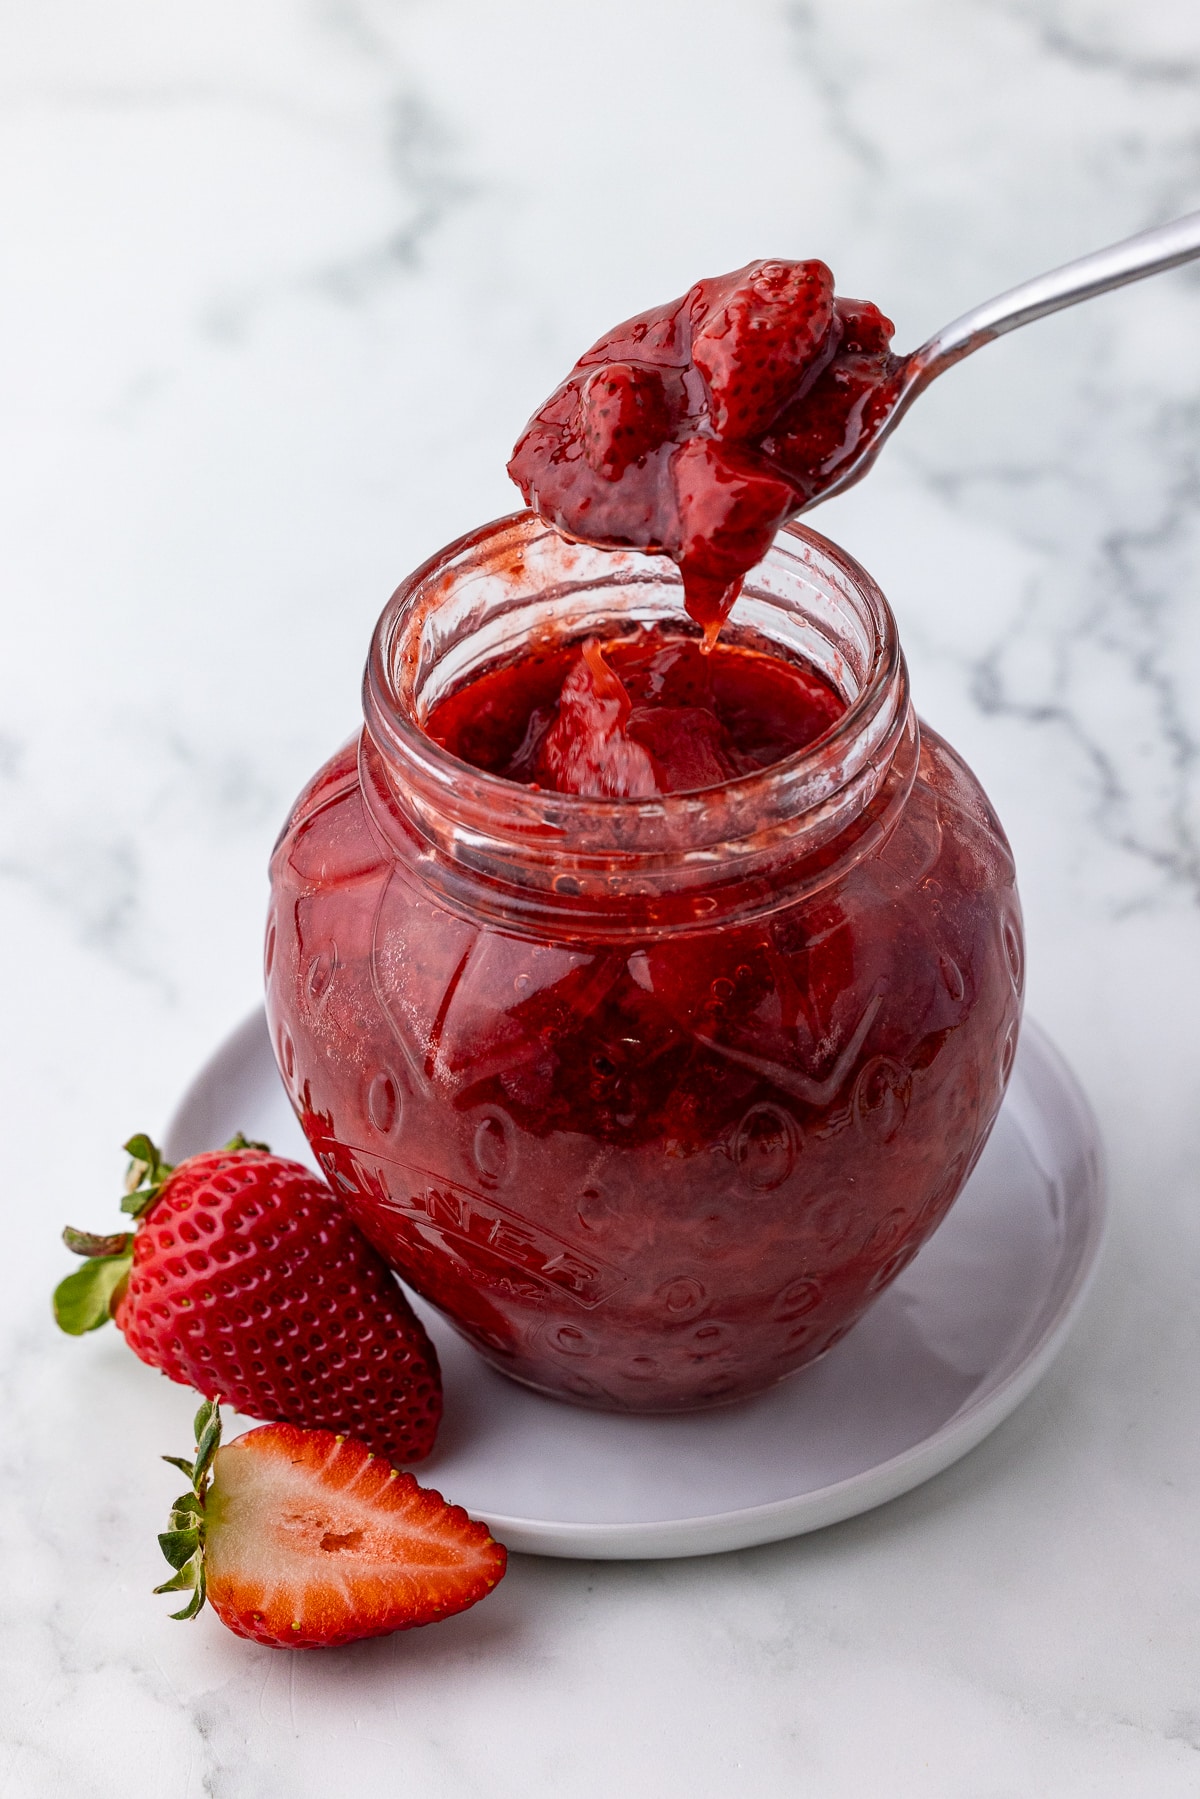 spoon of strawberry compote